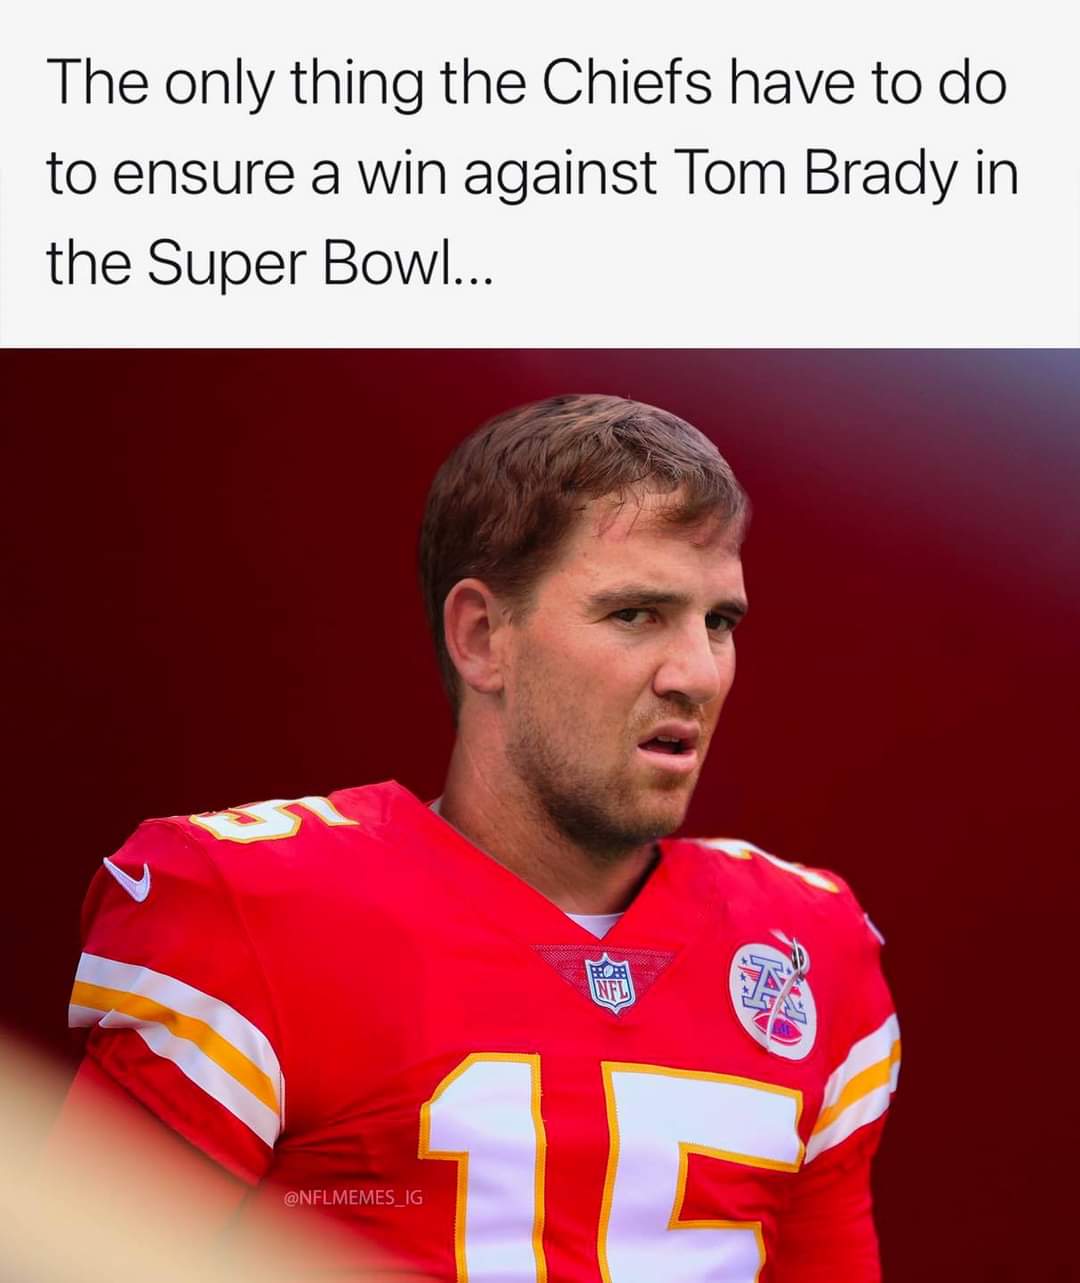 soccer player - The only thing the Chiefs have to do to ensure a win against Tom Brady in the Super Bowl... Poh Nfl Or